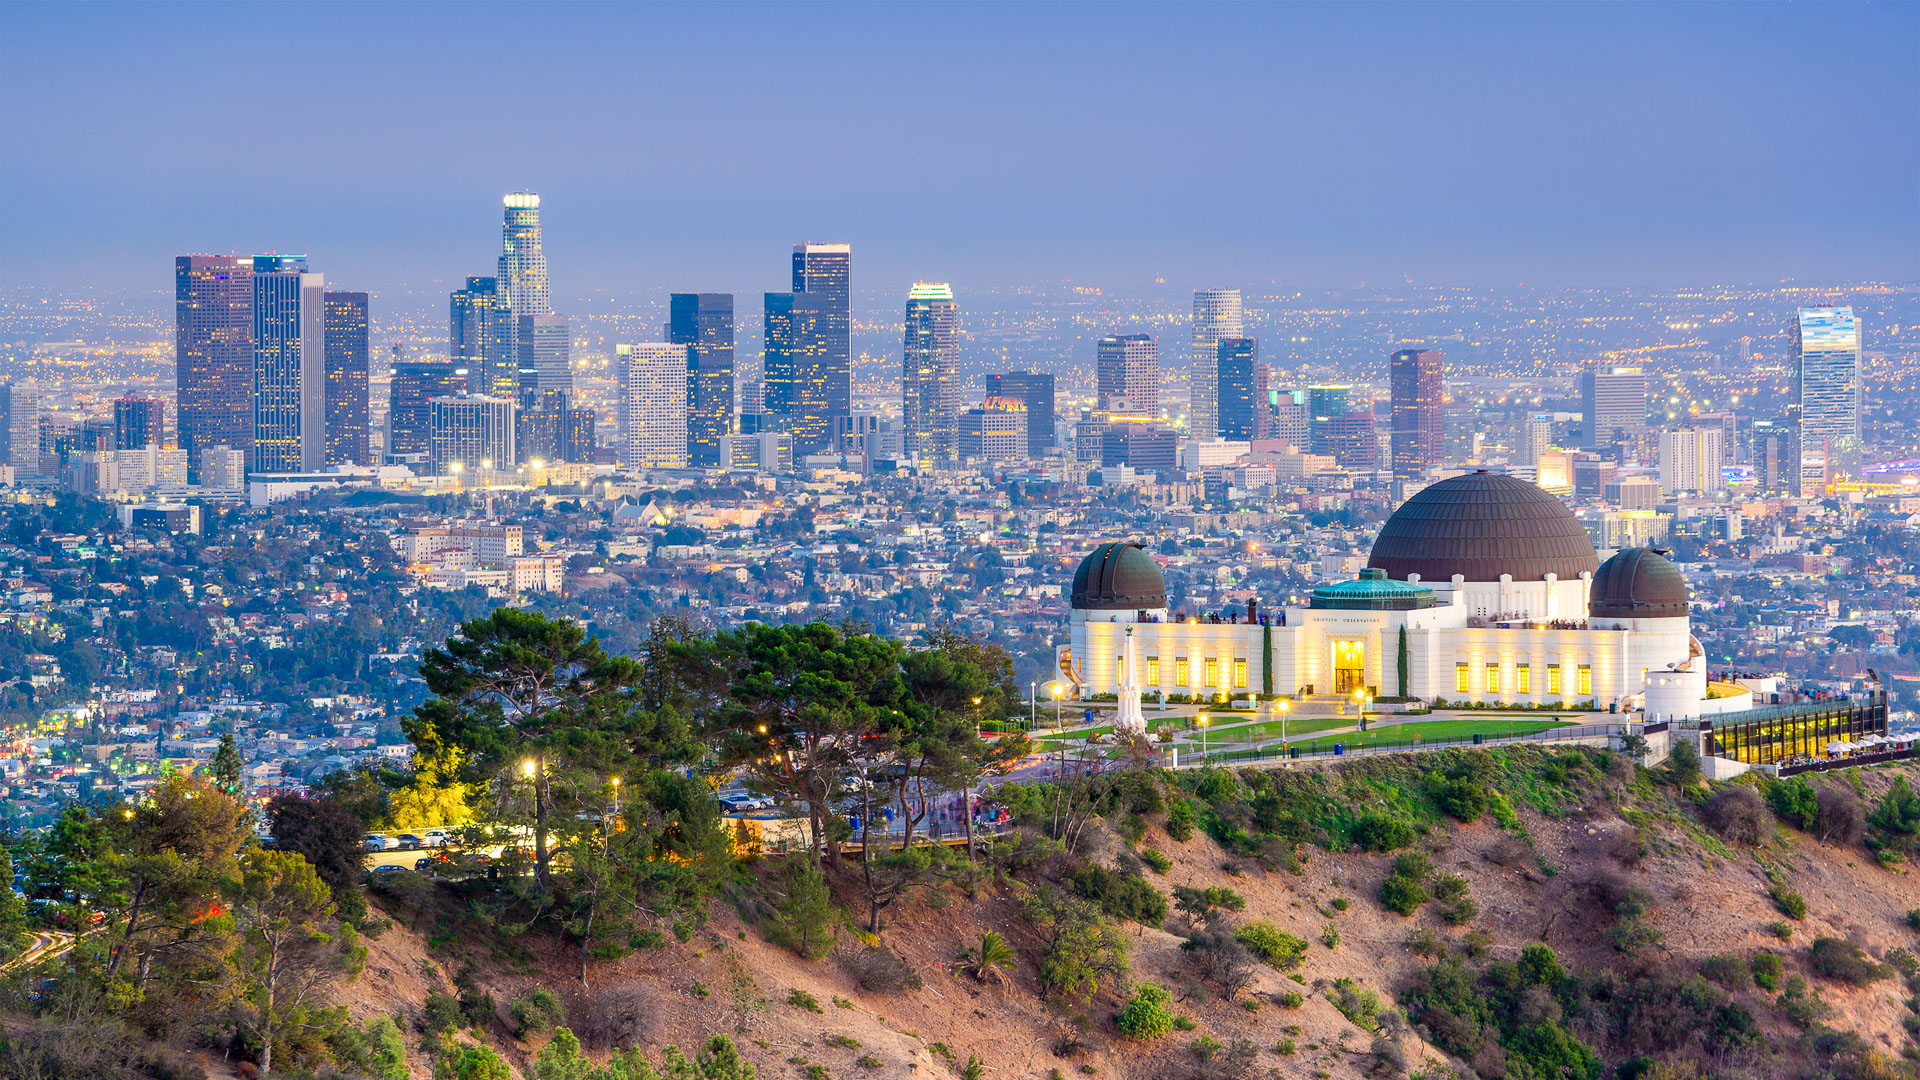 <ul> <li>Cheapest time to fly: September</li> <li>Where to find affordable lodging: Hollywood</li> <li>Where to find cheap eats: IndiMex Eats, Doomie's Next Mex</li> <li>Free or affordable entertainment: Hollywood Walk of Fame, Griffith Observatory</li> </ul> <p>You'll find the cheapest airfare to Los Angeles in September, when the average round-trip flight goes for $238 -- though January isn't too far behind. To trim hotel costs, look to the Hollywood area just west of Downtown LA, where four nights can cost you as little as $272.</p> <p>Los Angeles can be pricey, but some of Hollywood's most iconic attractions won't cost you a dime, like strolling along the Hollywood Walk of Fame. The palatial Griffith Observatory and Griffith Park is one of the area's most beautiful attractions perched in the mountains overlooking Hollywood. A visit to the planetarium costs $10 for adults and $6 for children under 12, but the observatory building, grounds and telescope are always free.</p> <p>For a cheap meal in Hollywood, head to IndiMex Eats, where you can get two savory samosas for $5 or a heaping order of masala fries for just $6.50. Doomie's Next Mex is another great option, where you can load up on a huge order of crispy buñuelos with fresh whipped cream for $8.</p> <p><strong><em>See: <a href="https://www.gobankingrates.com/investing/real-estate/why-nobody-is-buying-vacation-homes-anymore/?utm_term=related_link_3&utm_campaign=1228112&utm_source=msn.com&utm_content=5&utm_medium=rss" rel="">Why Nobody Is Buying Vacation Homes Anymore</a><br>Discover: <a href="https://www.gobankingrates.com/investing/real-estate/affordable-up-and-coming-us-locations-to-buy-vacation-property-in-2023/?utm_term=related_link_4&utm_campaign=1228112&utm_source=msn.com&utm_content=6&utm_medium=rss" rel="">5 Affordable Up-and-Coming US Locations To Buy Vacation Property in 2023</a></em></strong></p>